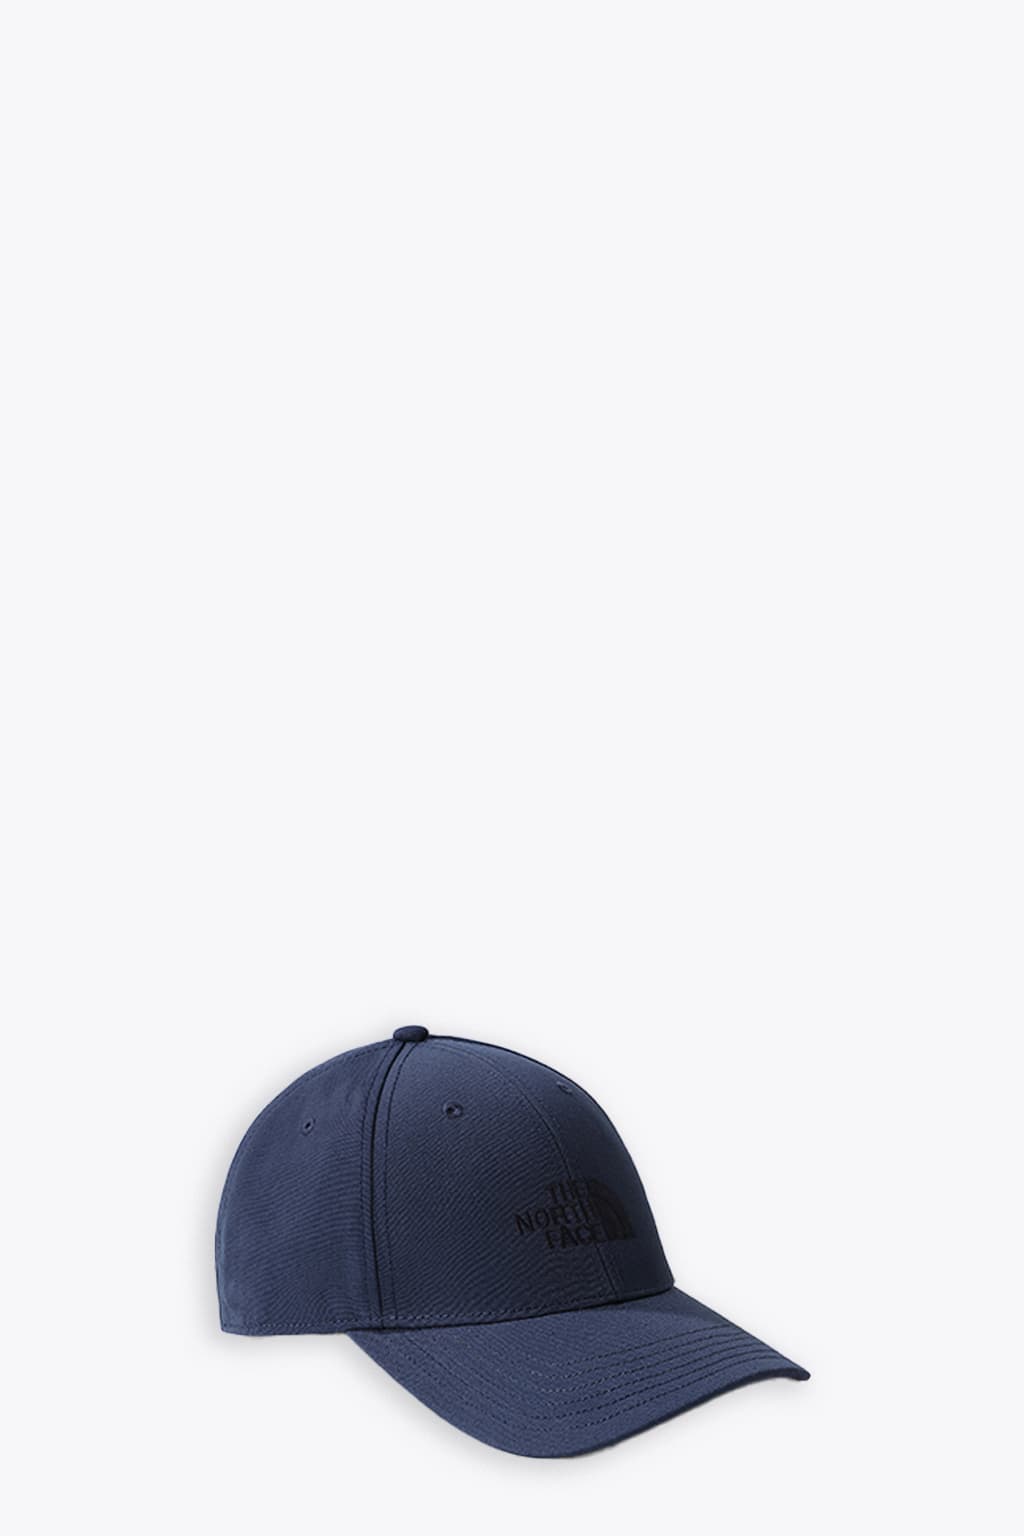 Embroidery Hat Smart Classic Cap With | 66 Recycled Hat Recycled Face Classic Blue - 66 North Closet The Logo